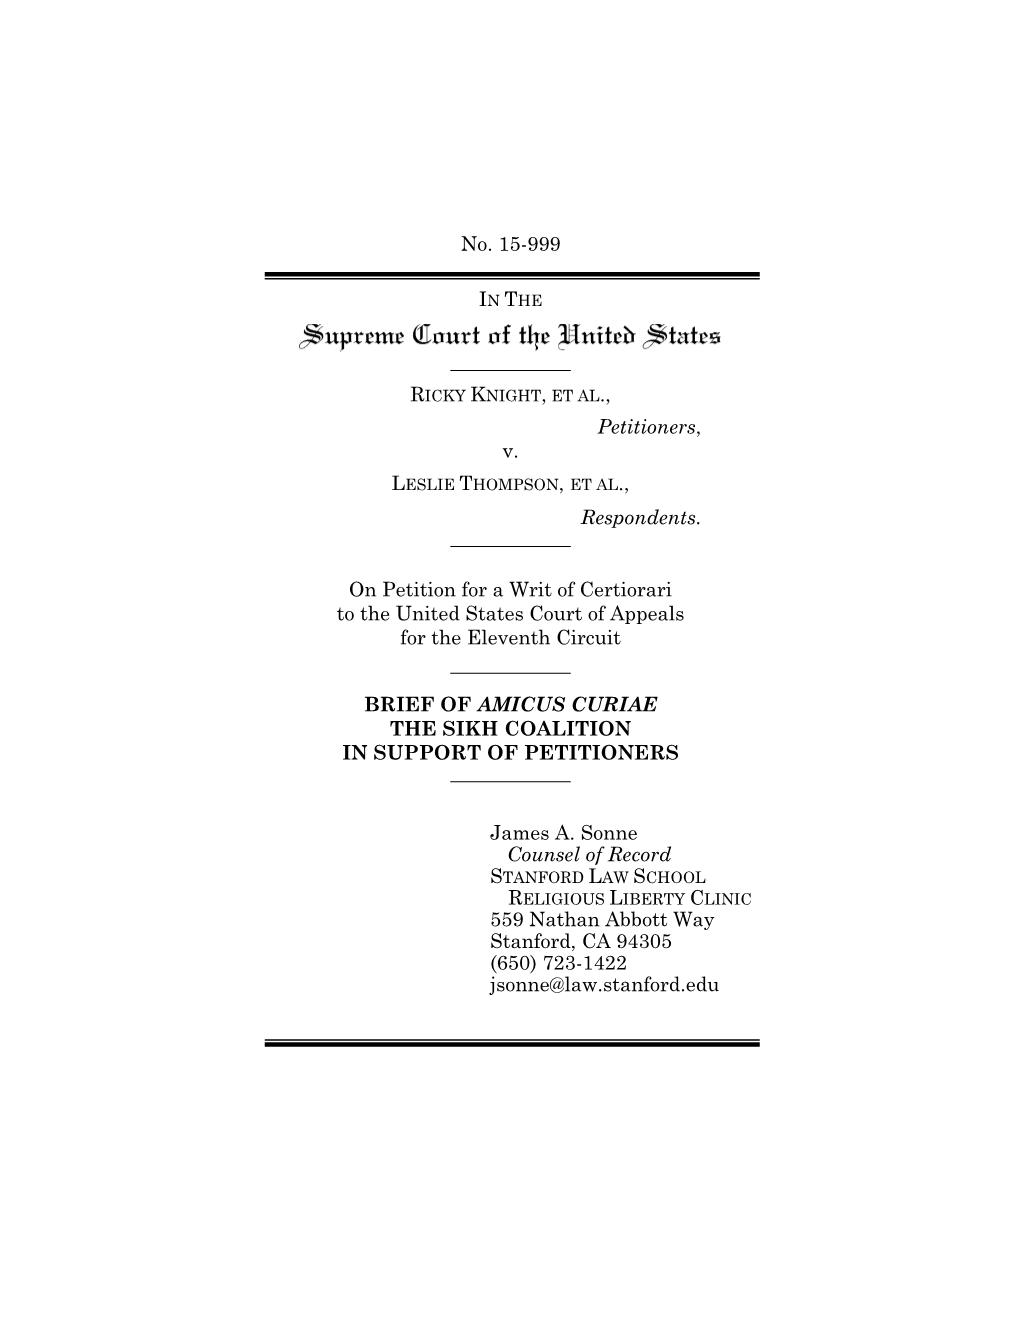 Amicus Brief of the Sikh Coalition